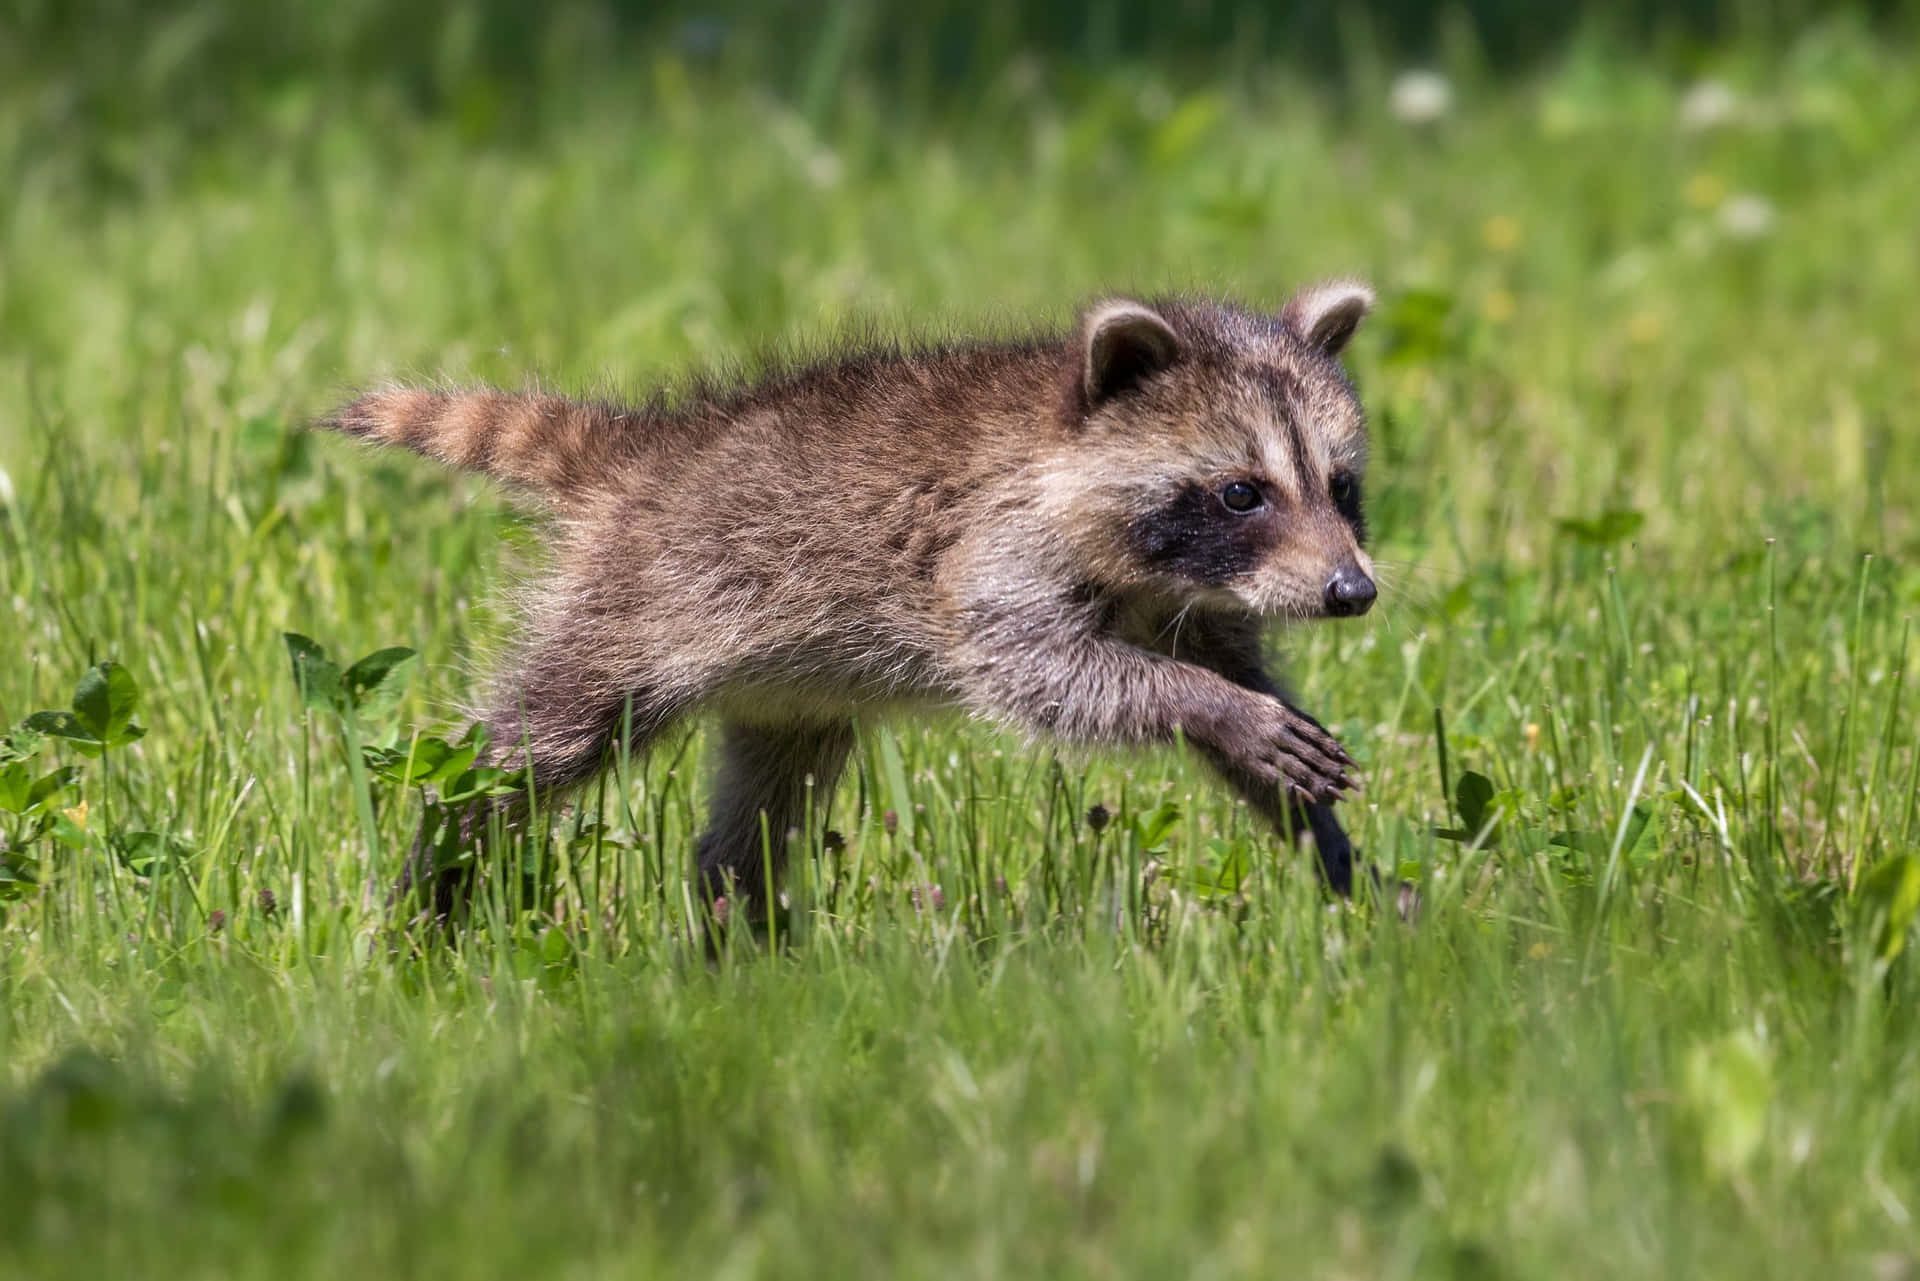 Cute Raccoon Running In Grass Picture